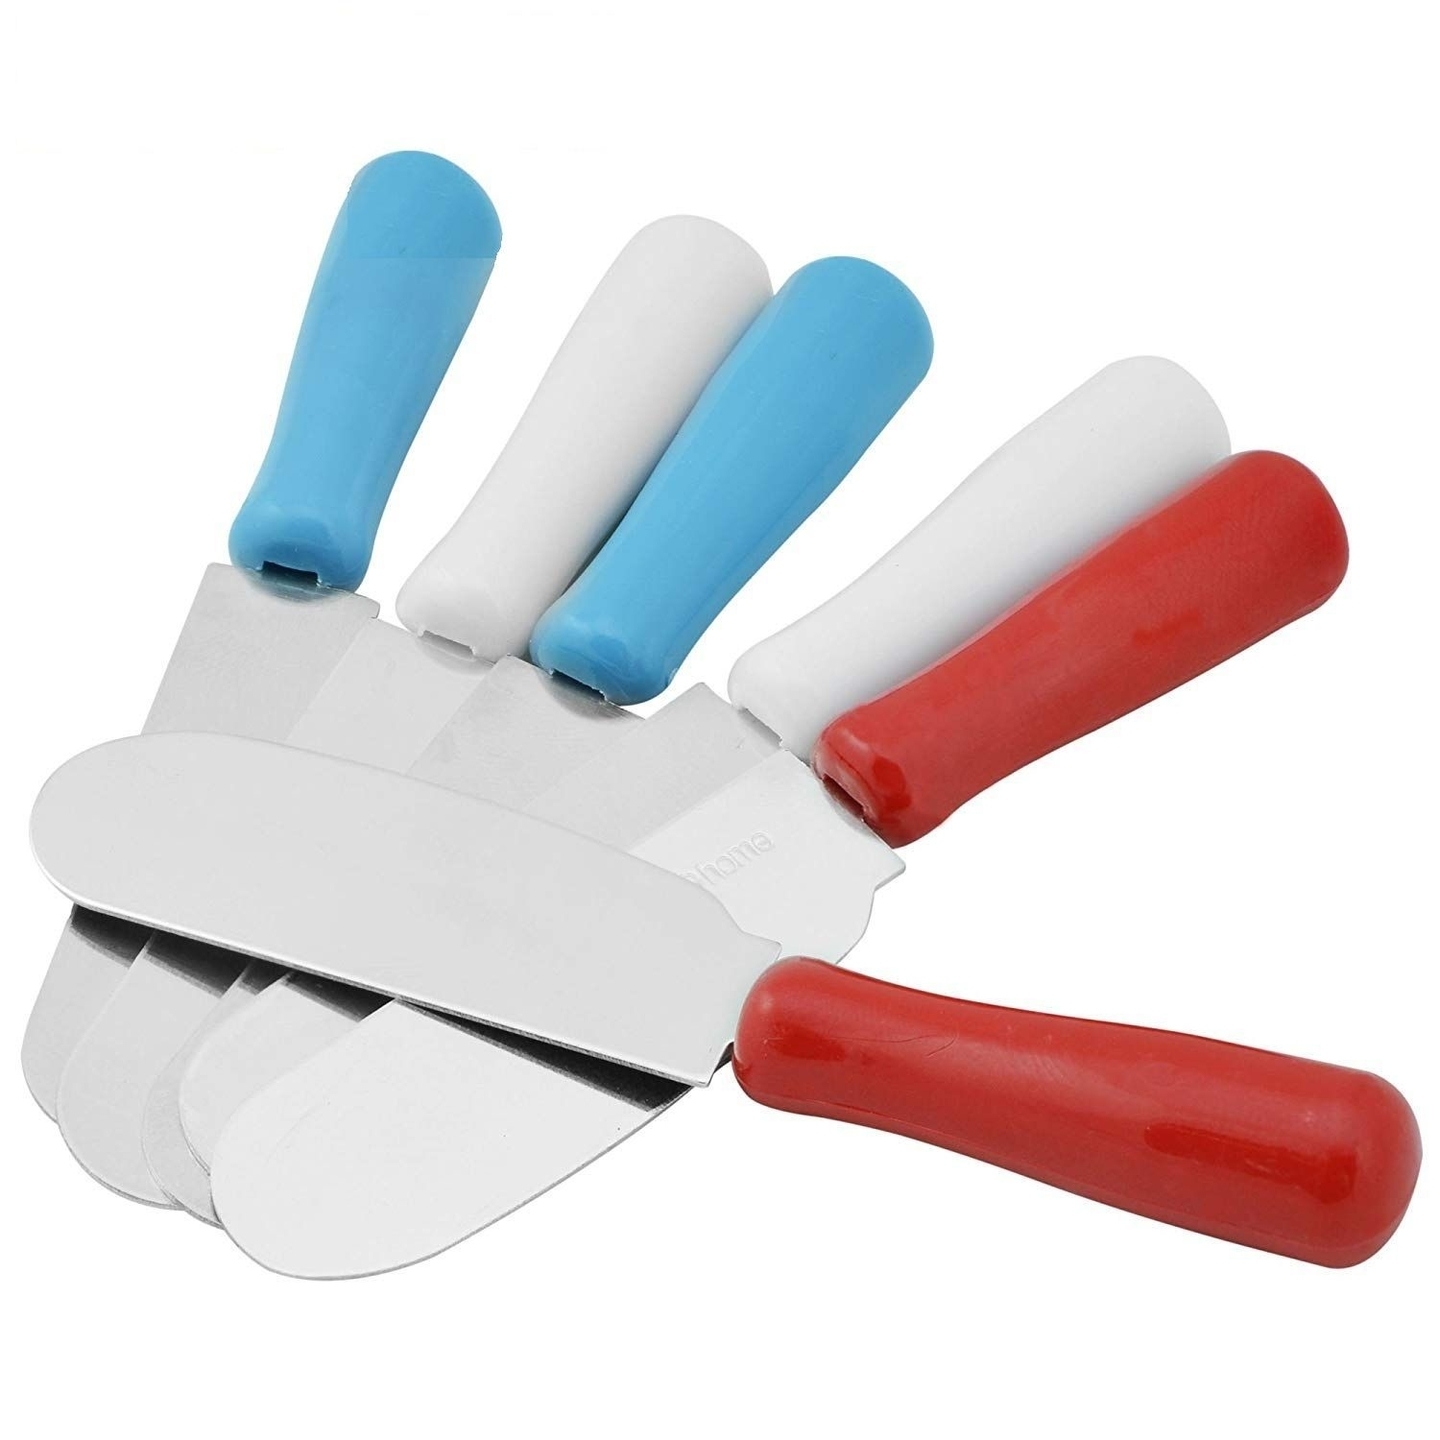 Mini Butter 6 Pcs Stainless Knife Cutting Spread Kitchen